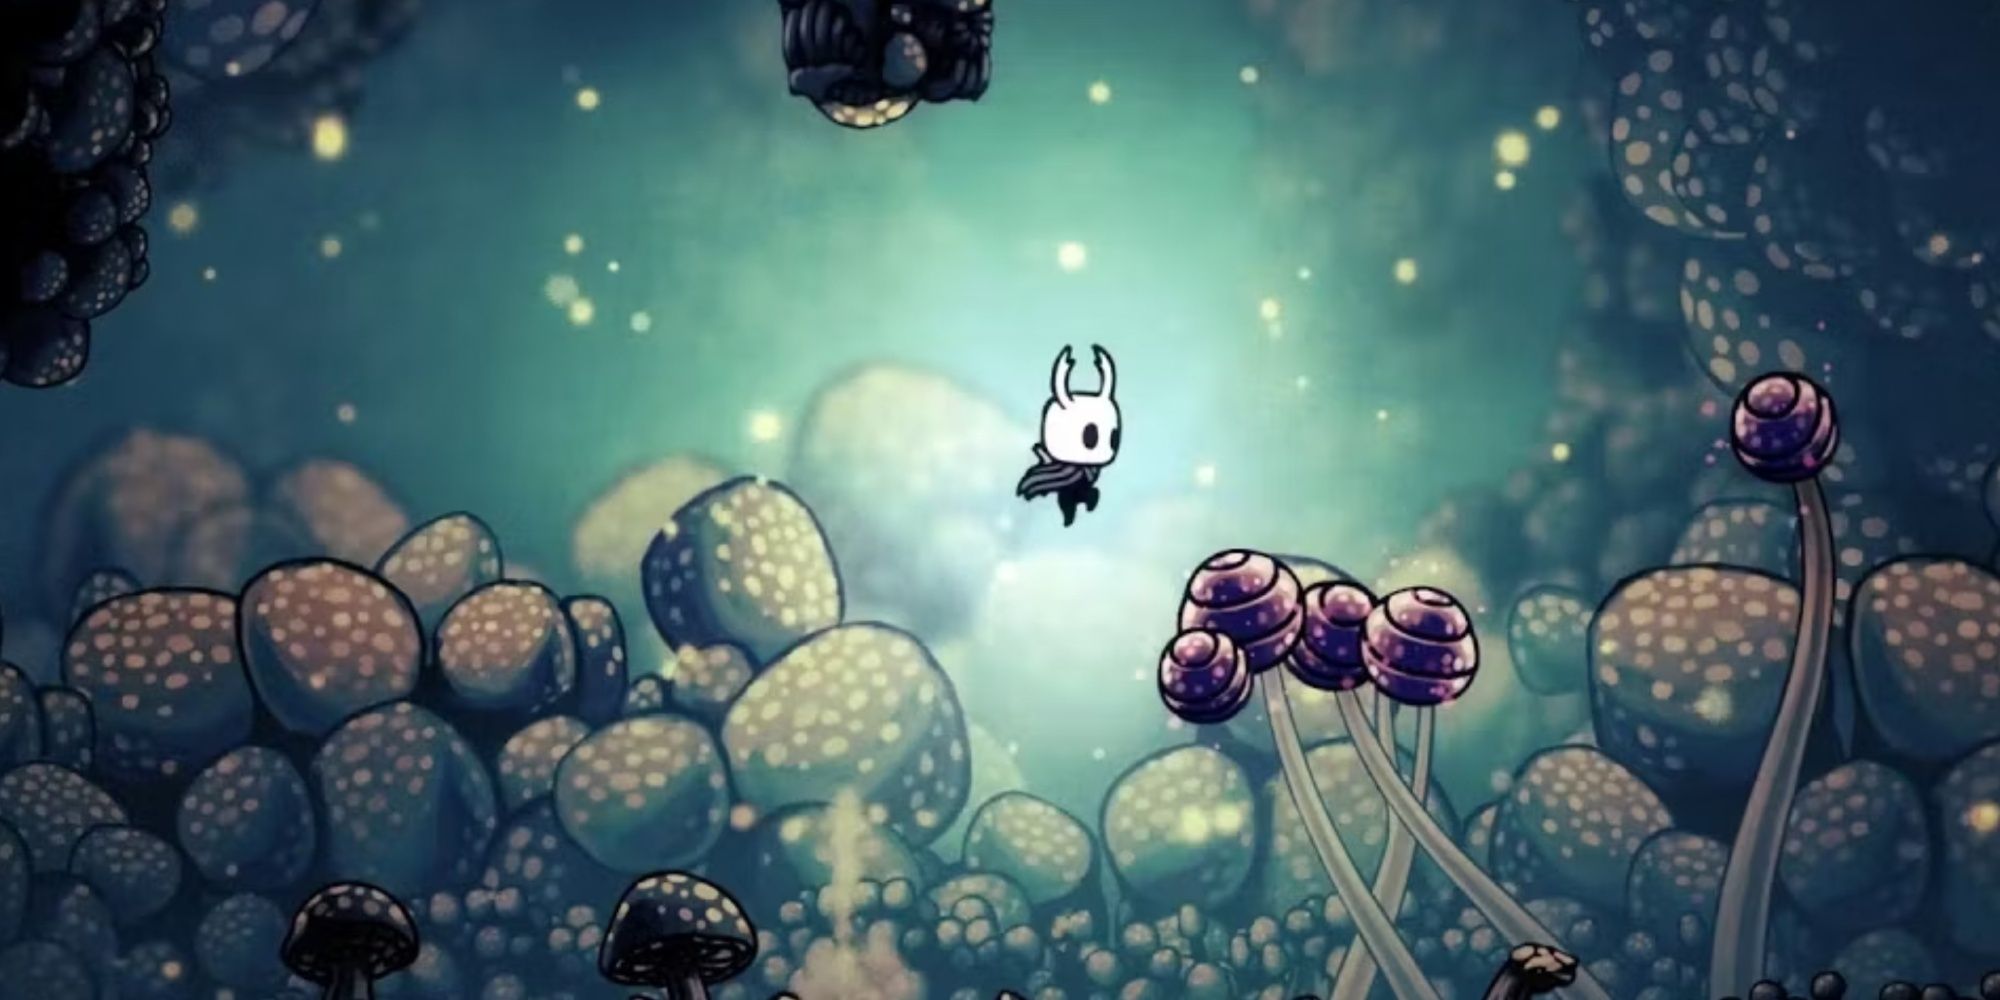 The Knight in the Fungal Wastes in Hollow Knight